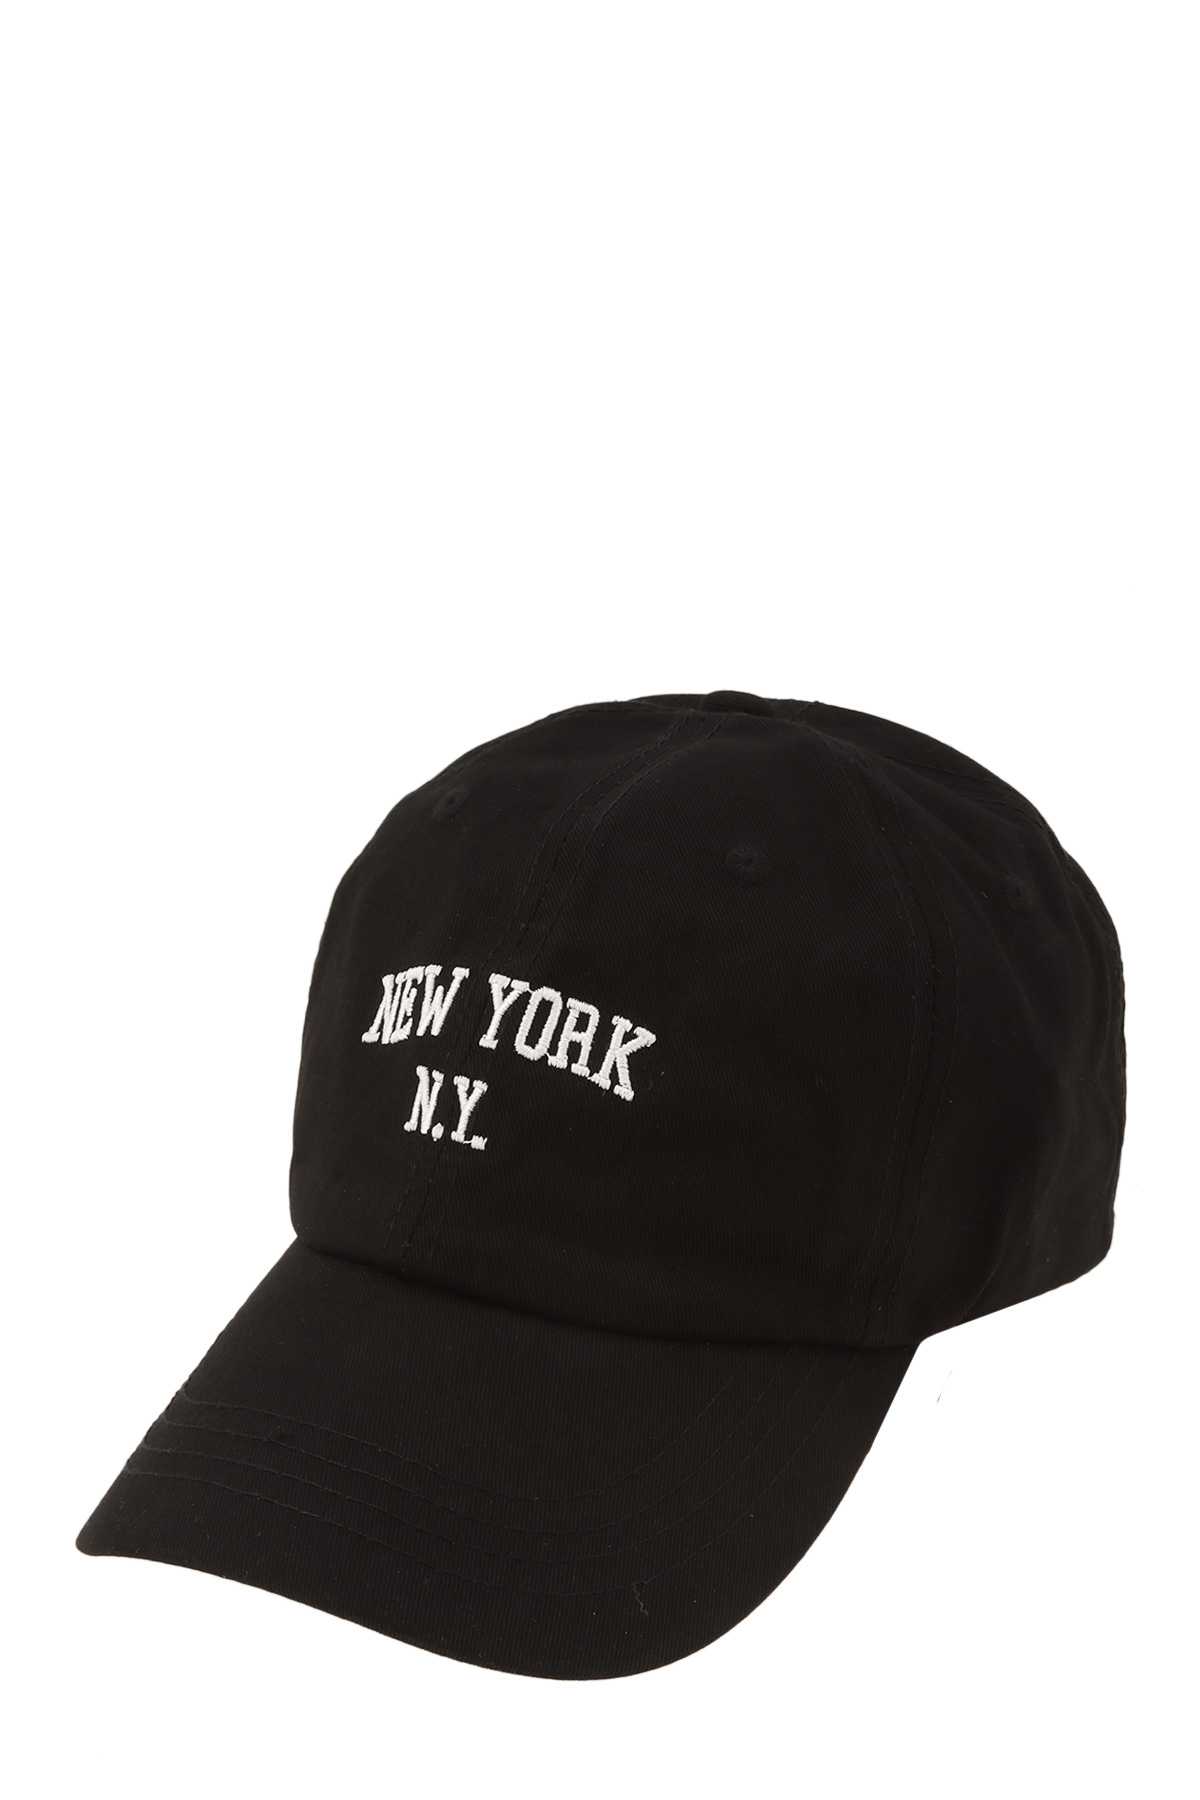 NEW YORK Embroidery Cotton Cap